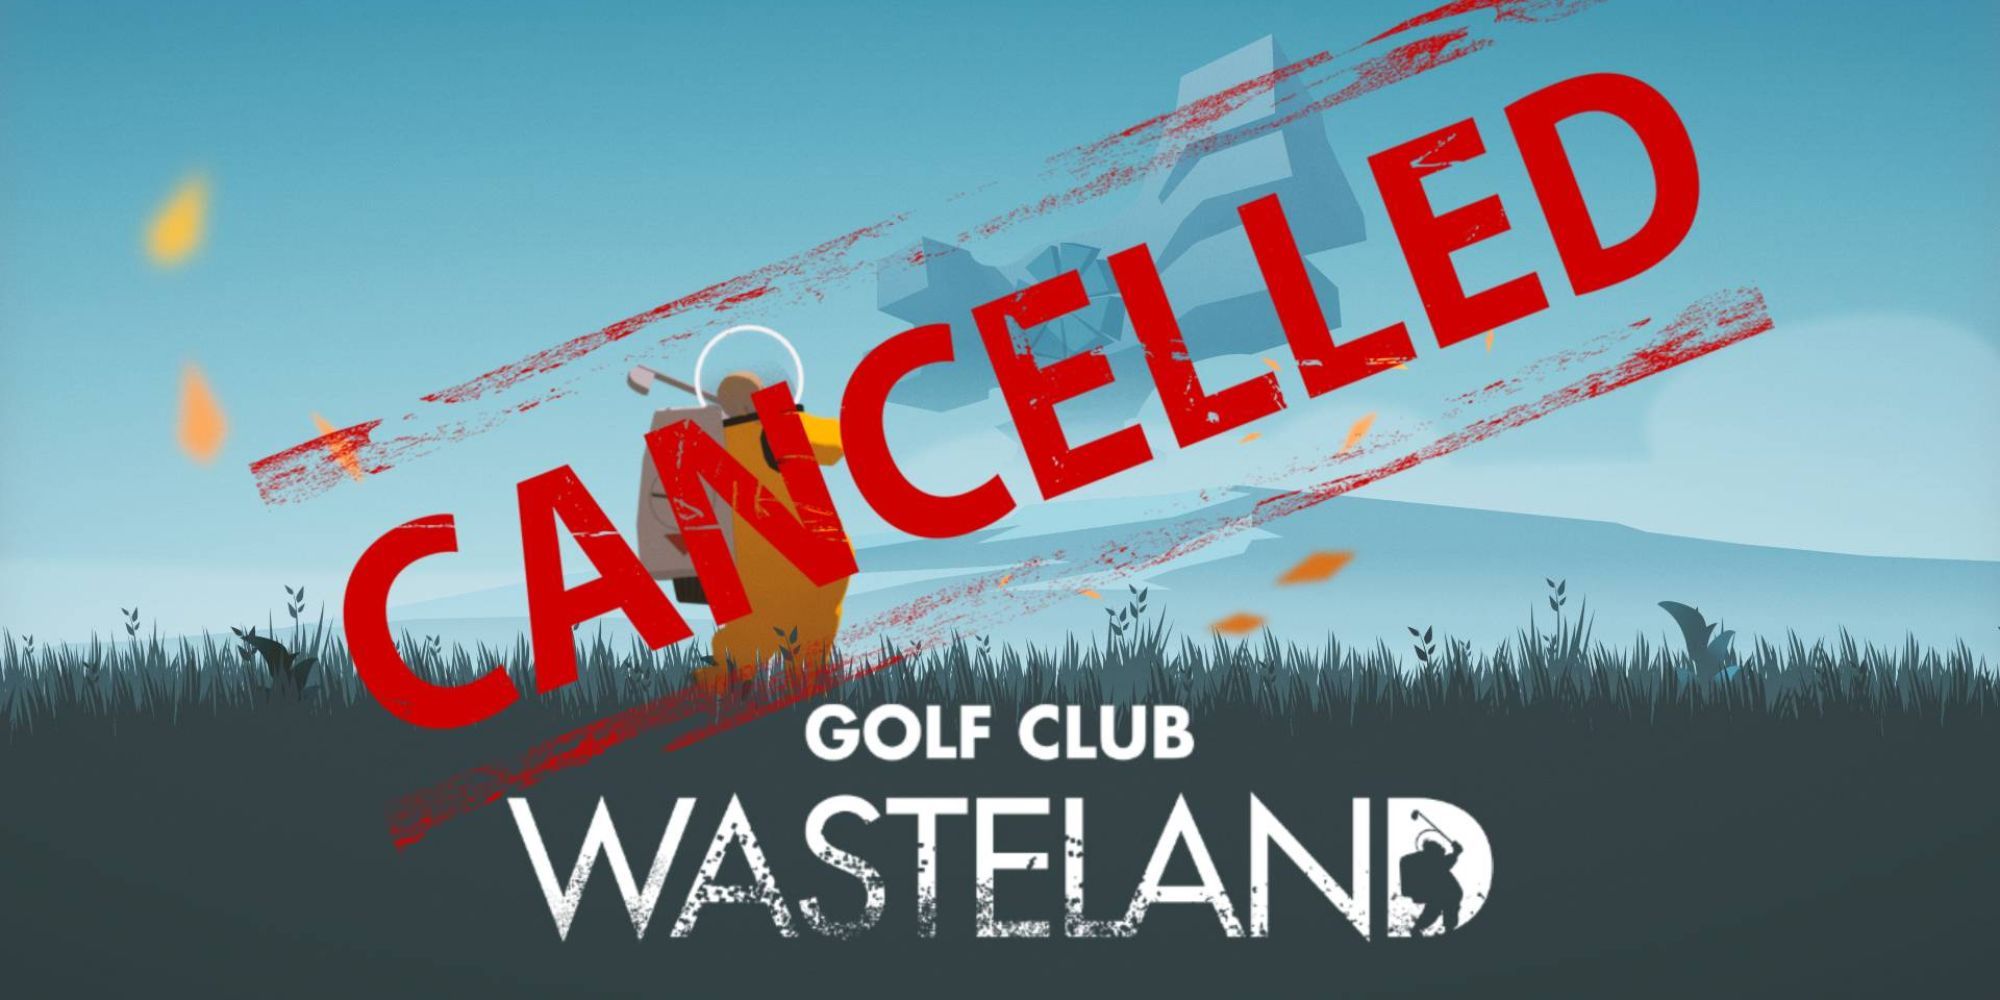 Golf Club Wasteland Dev Offering Exclusive $500 Million Edition To Help Fund His Trip Off This Doomed Planet